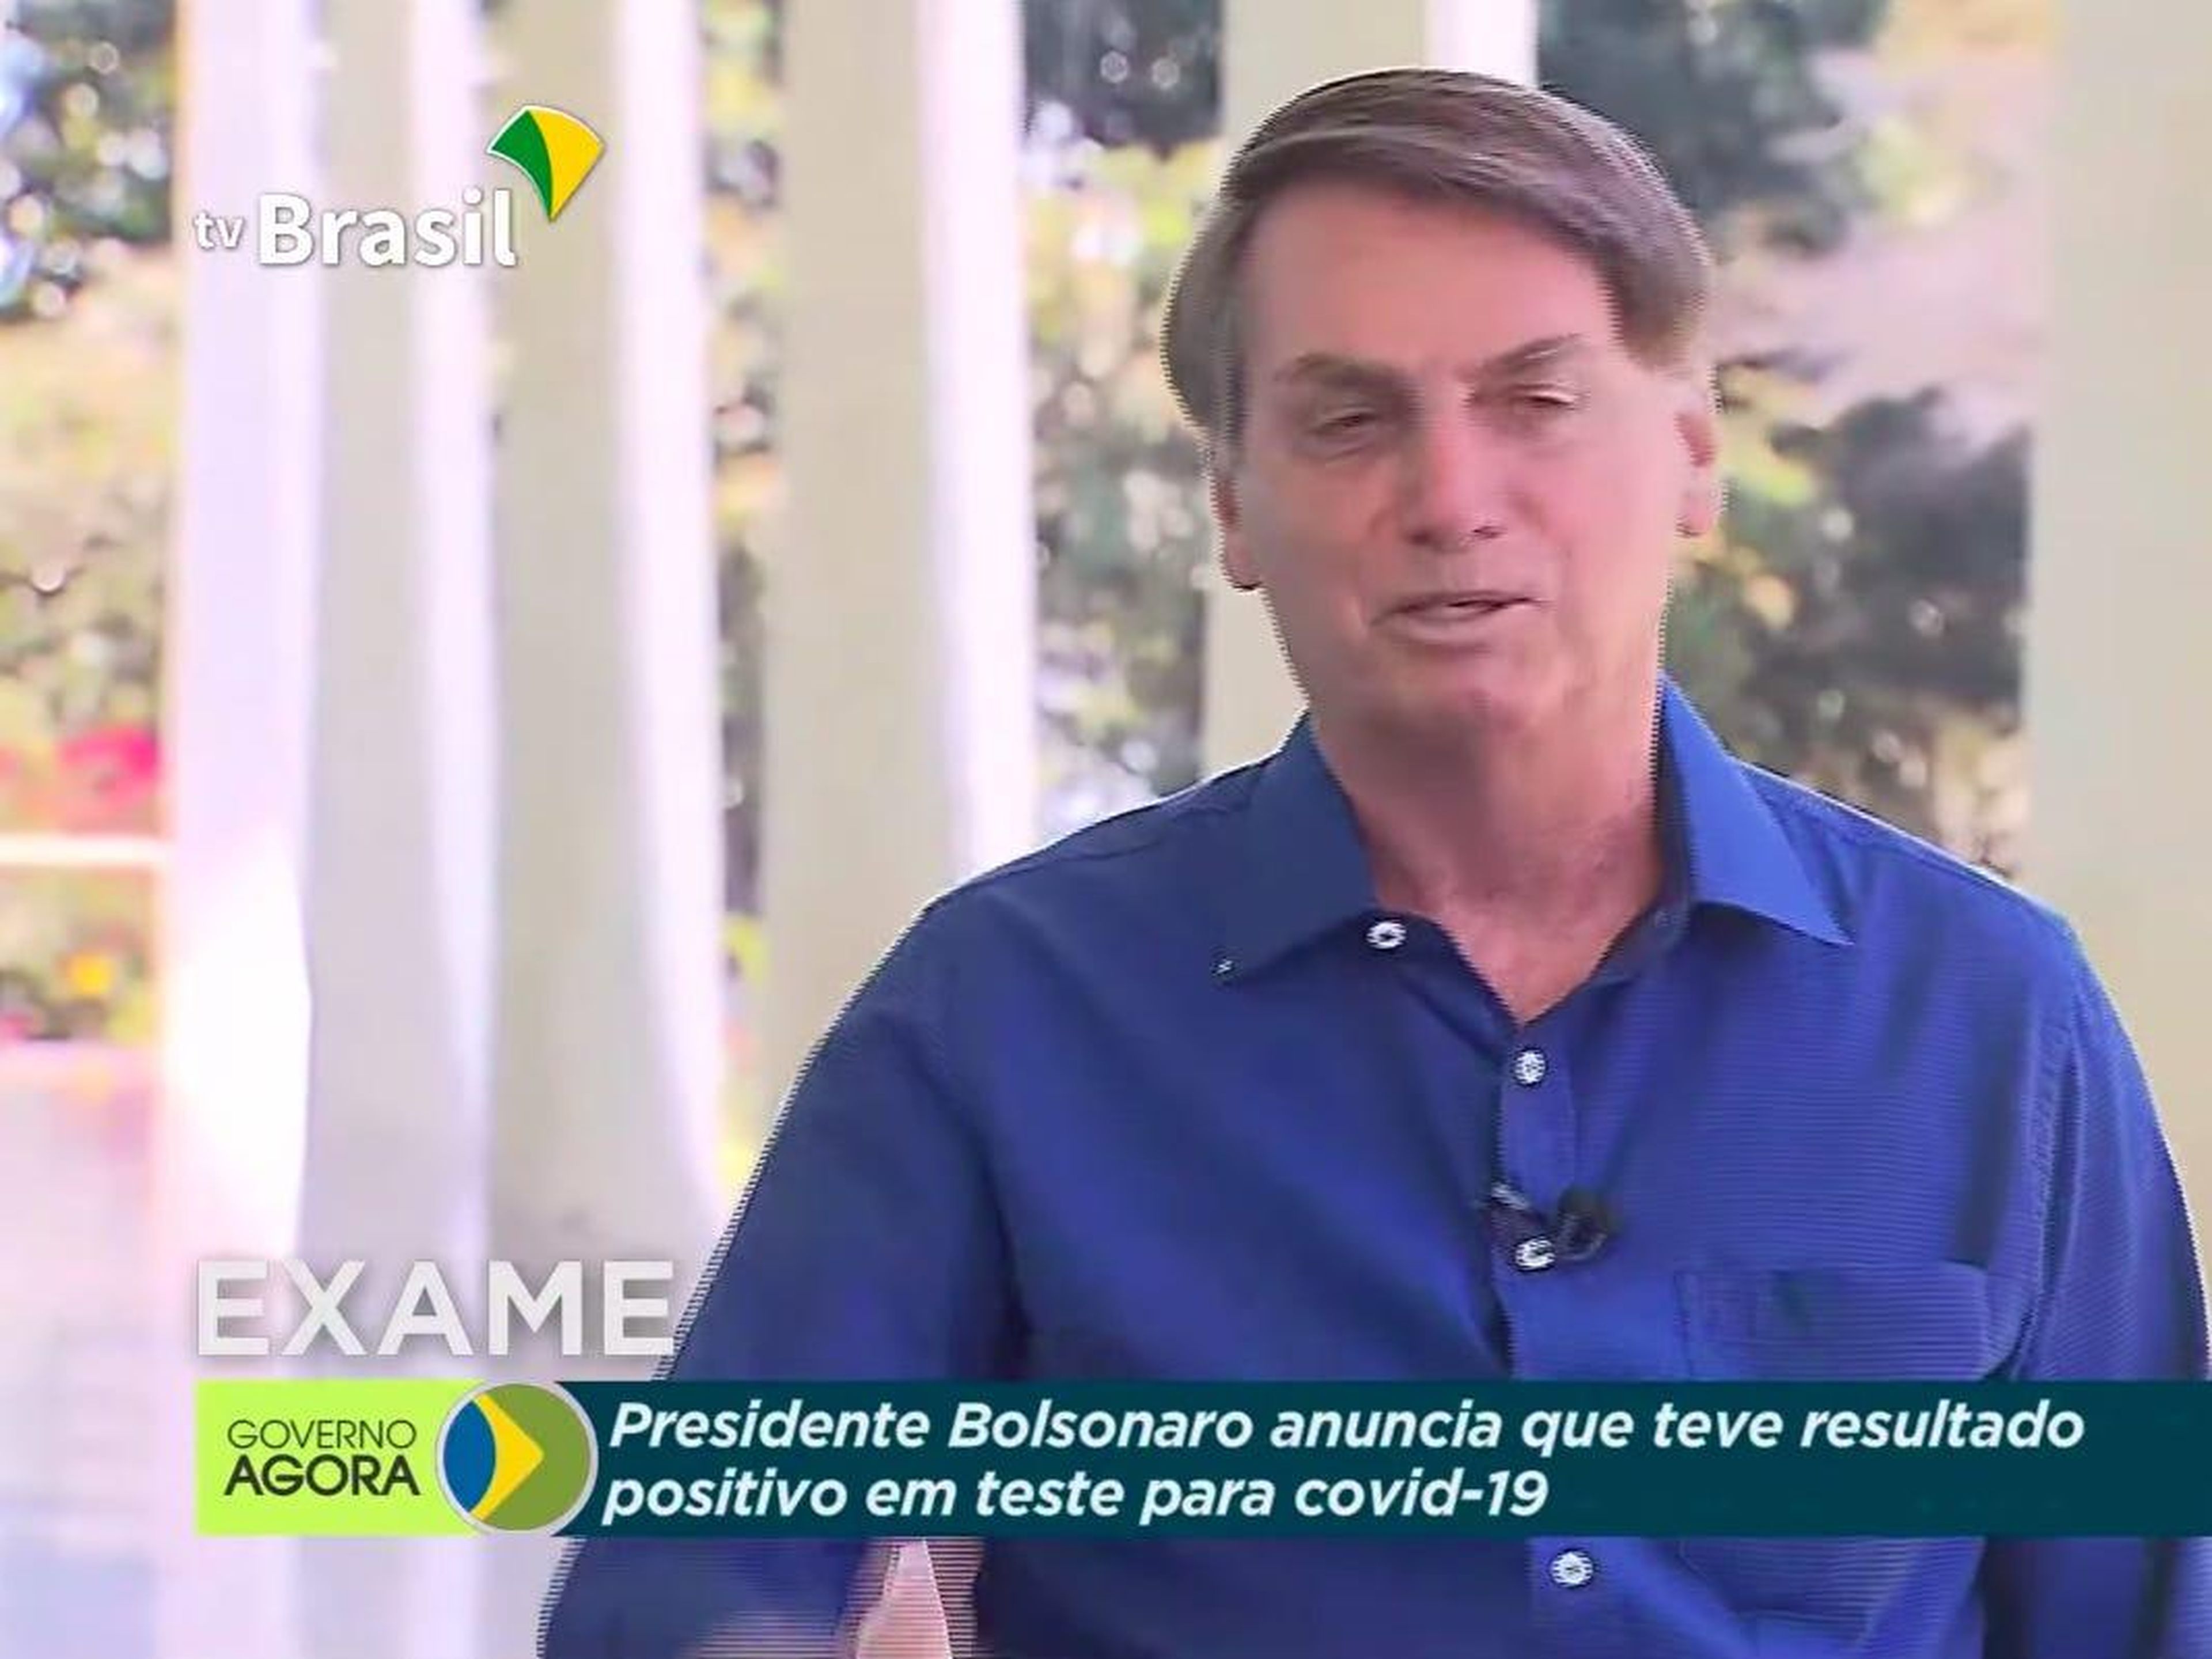 Jair Bolsonaro removed his mask after announcing he had tested positive for coronavirus in a TV broadcast, on July 8, 2020. TV Brasil